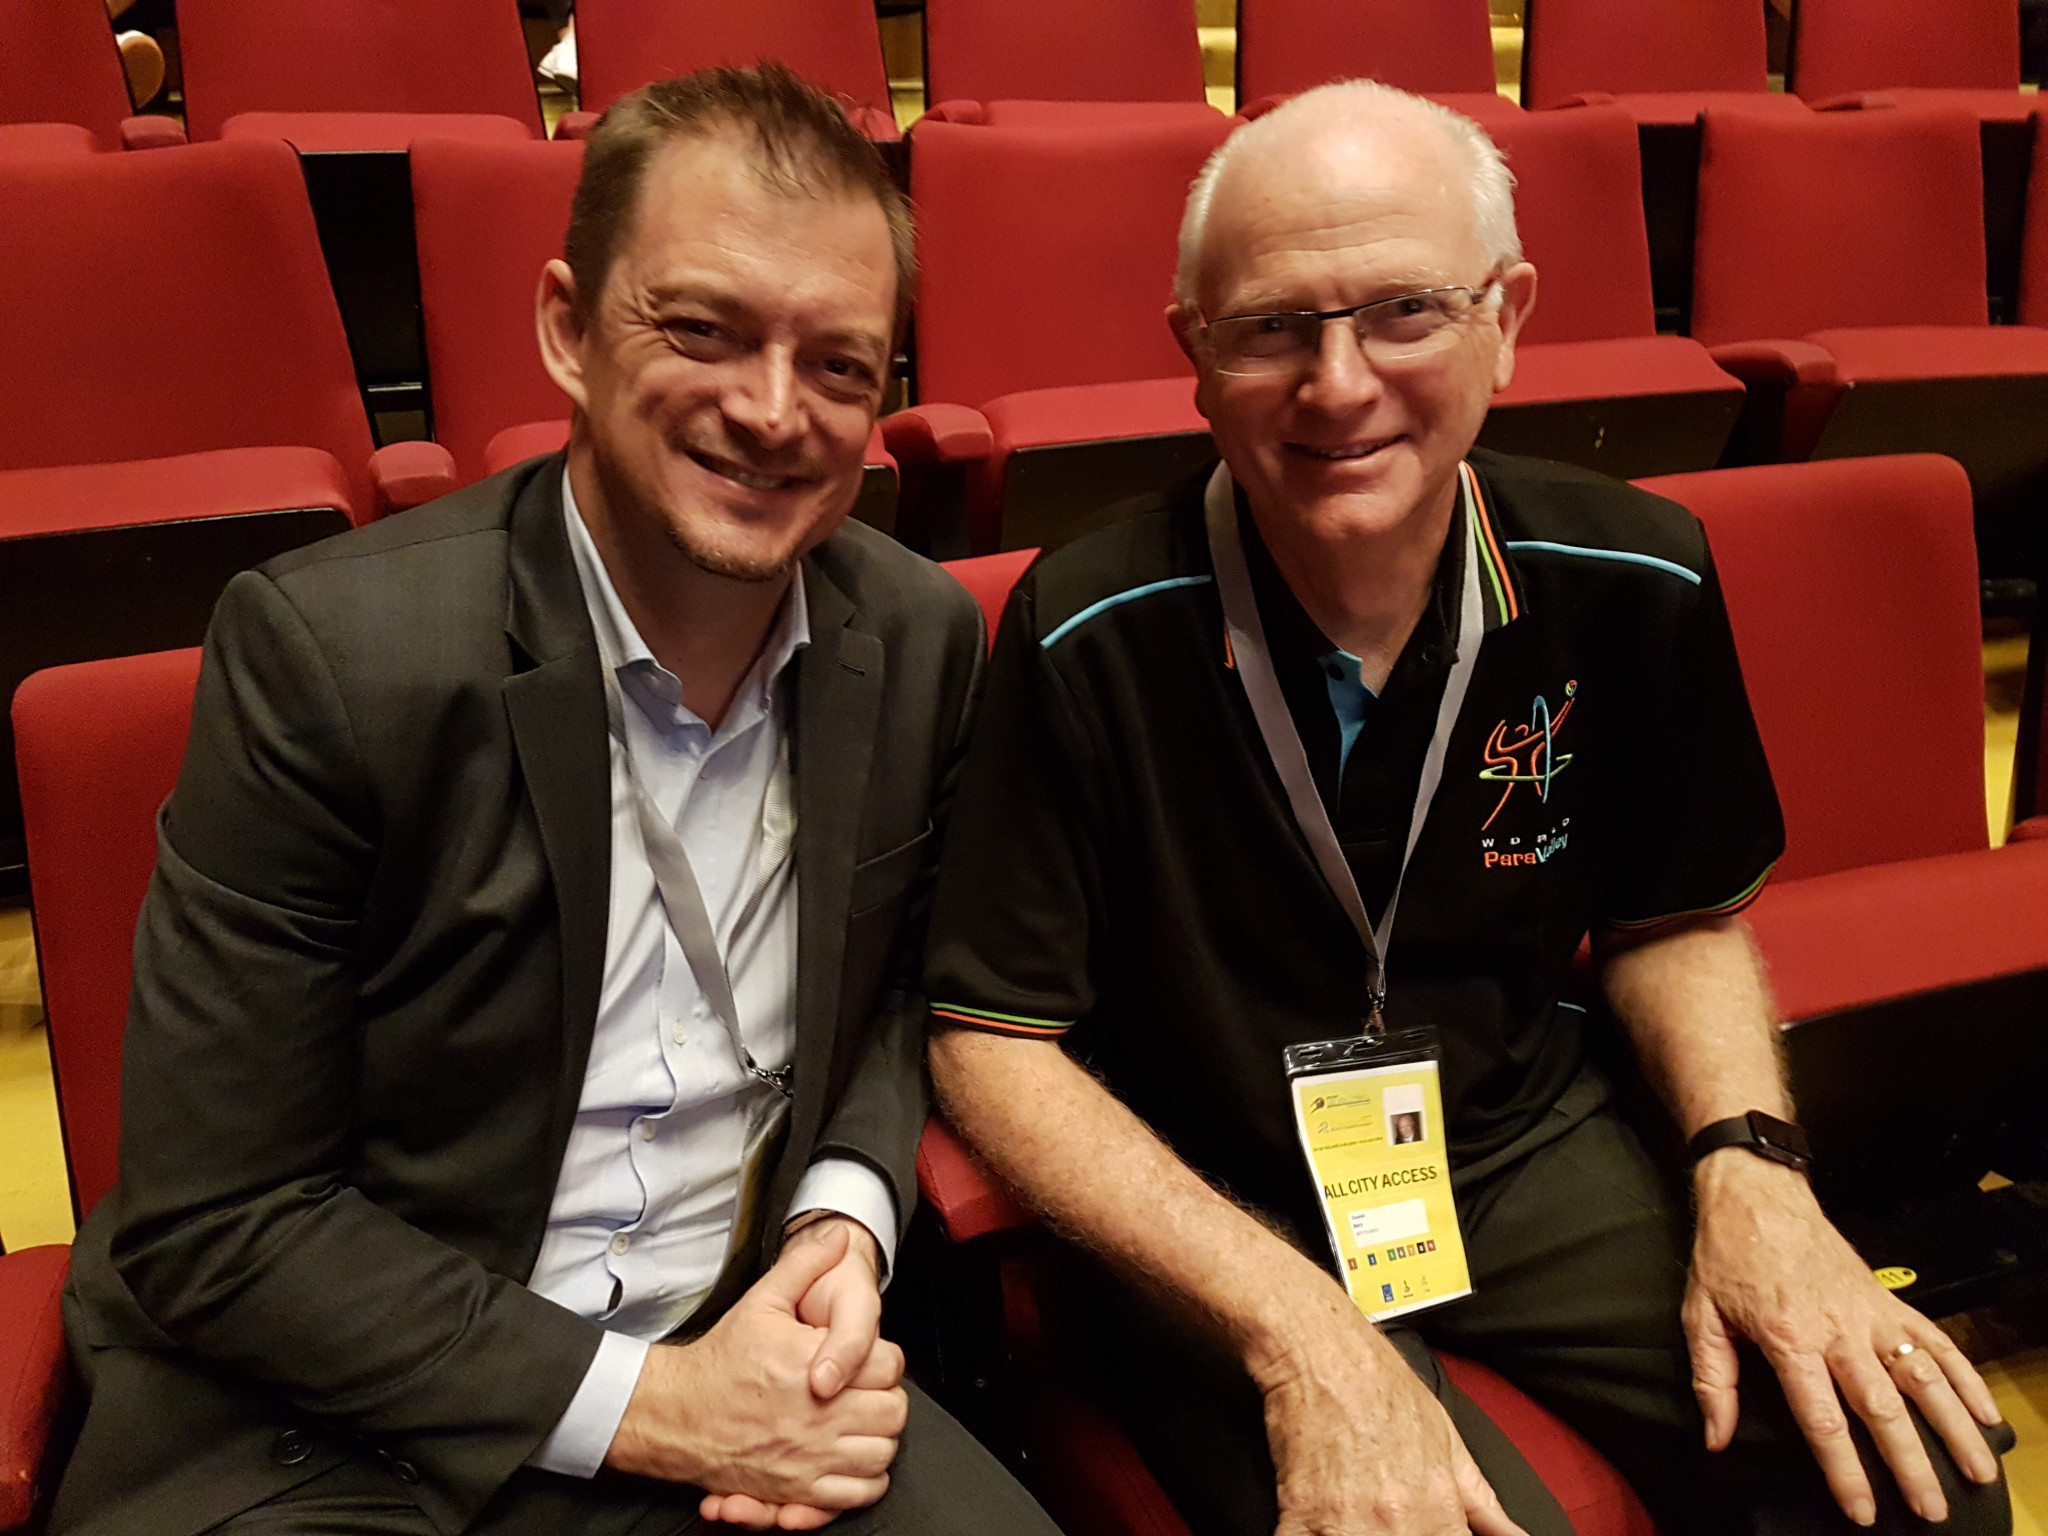 International Paralympic Committee President Andrew Parsons, left, held talks with World ParaVolley counterpart Barry Couzner, right, during the World ParaVolley Sitting Volleyball World Championships ©World ParaVolley 